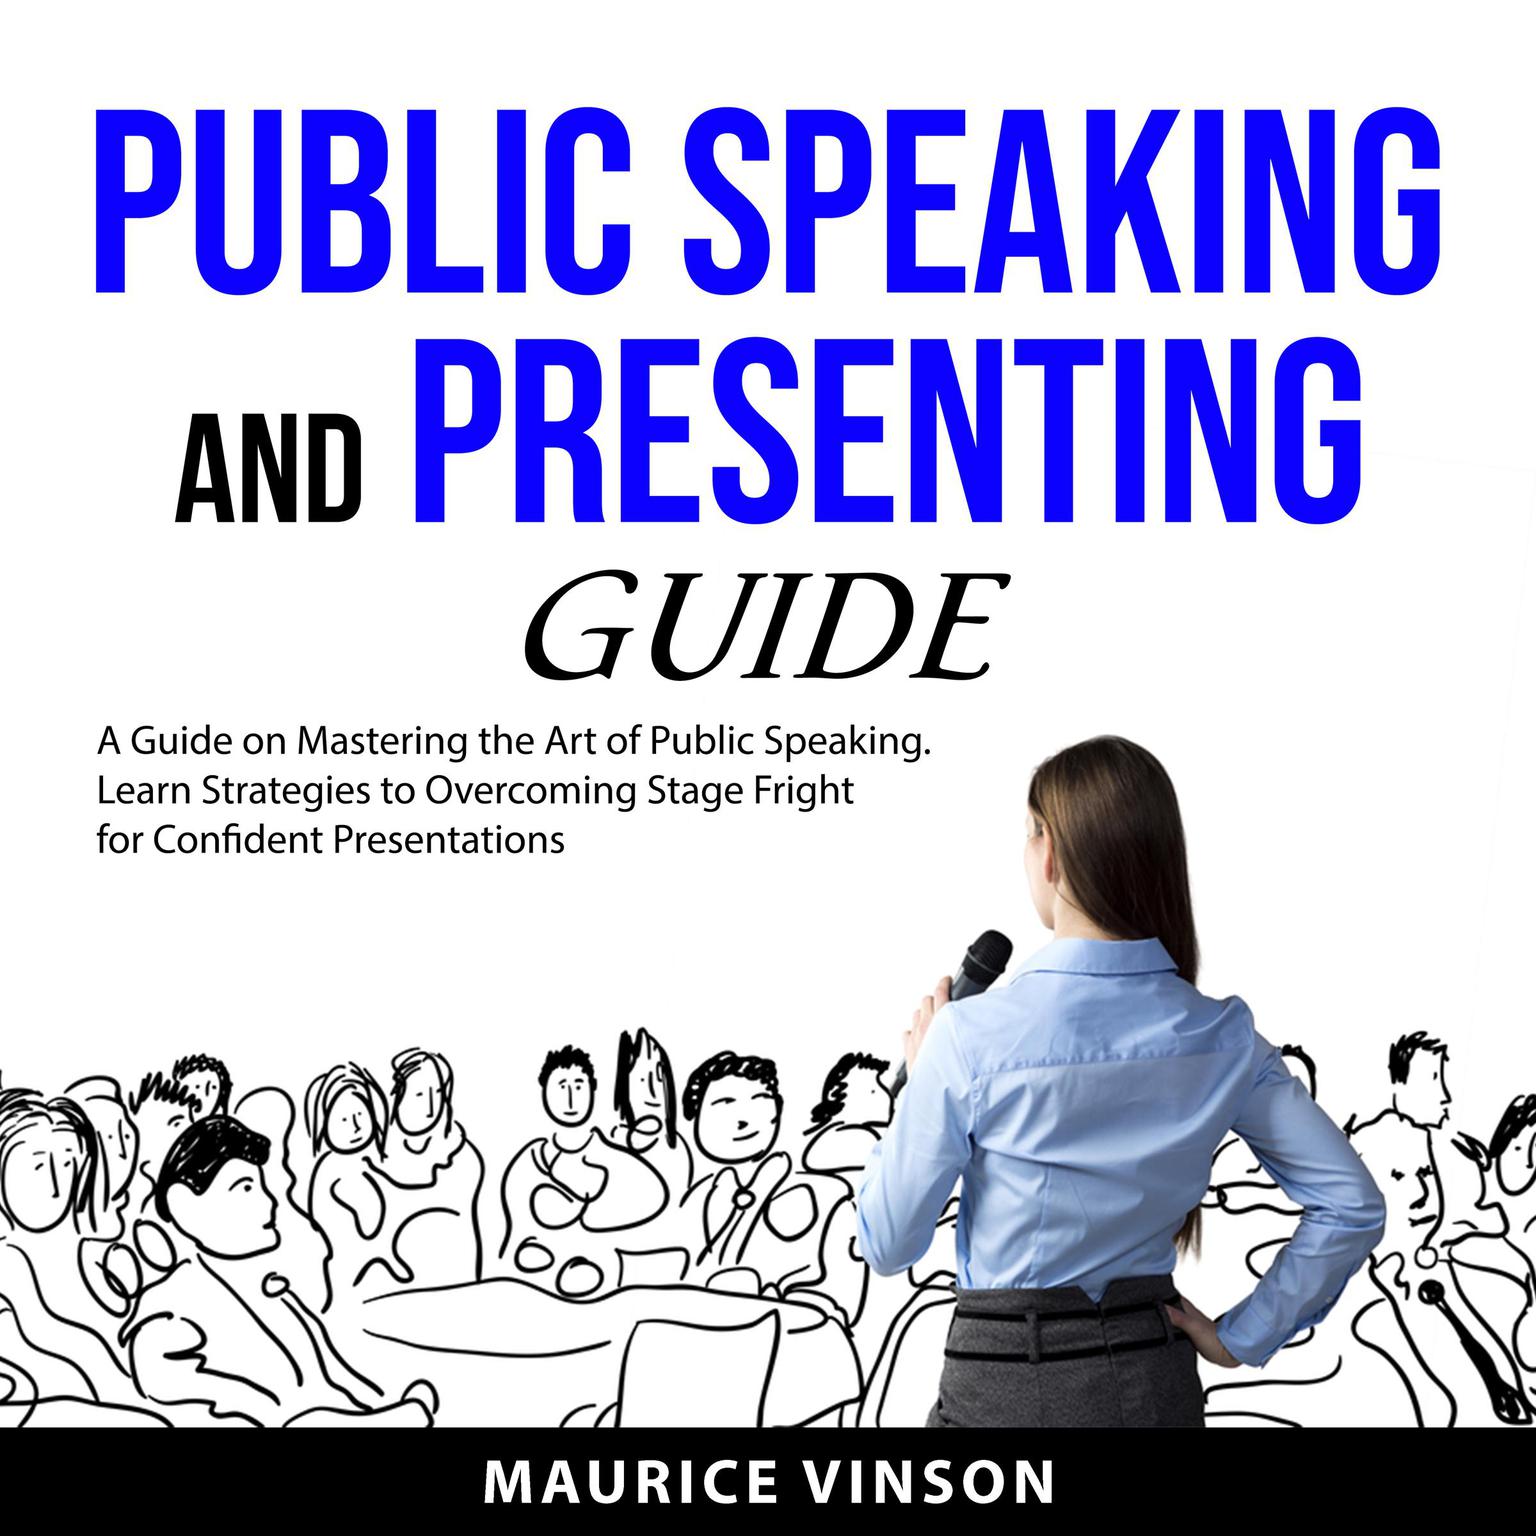 Public Speaking and Presenting Guide Audiobook, by Maurice Vinson